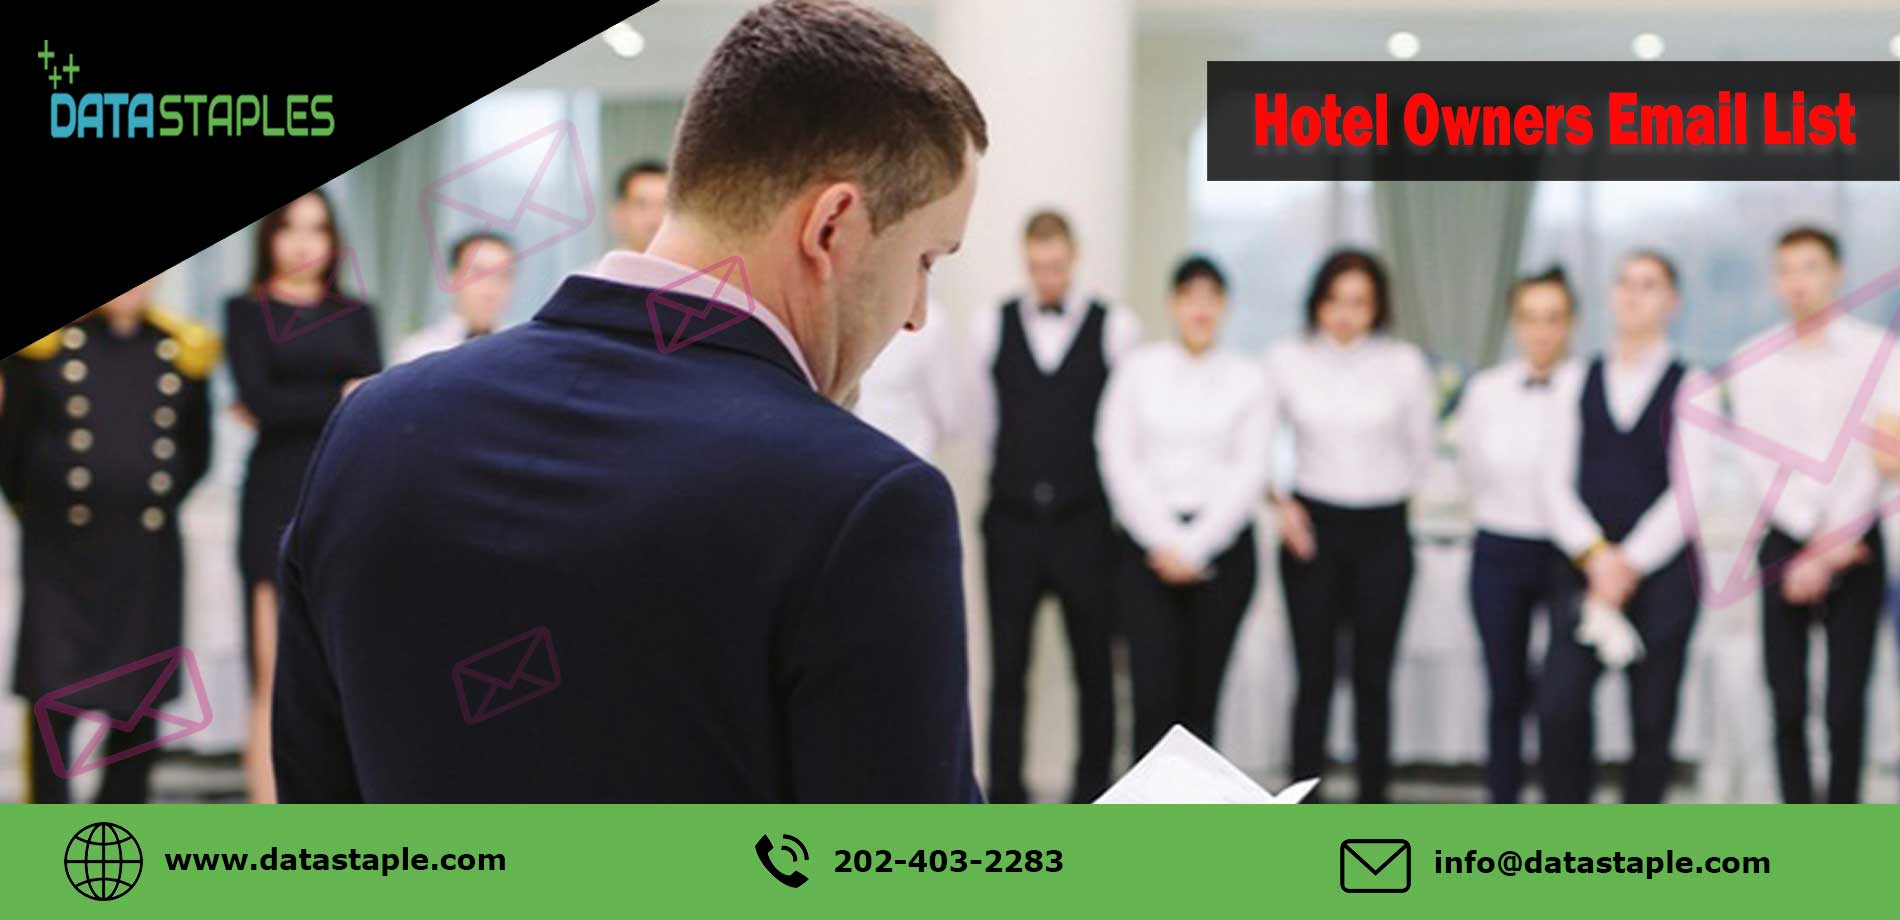 Hotel Owners Email List | DataStaples